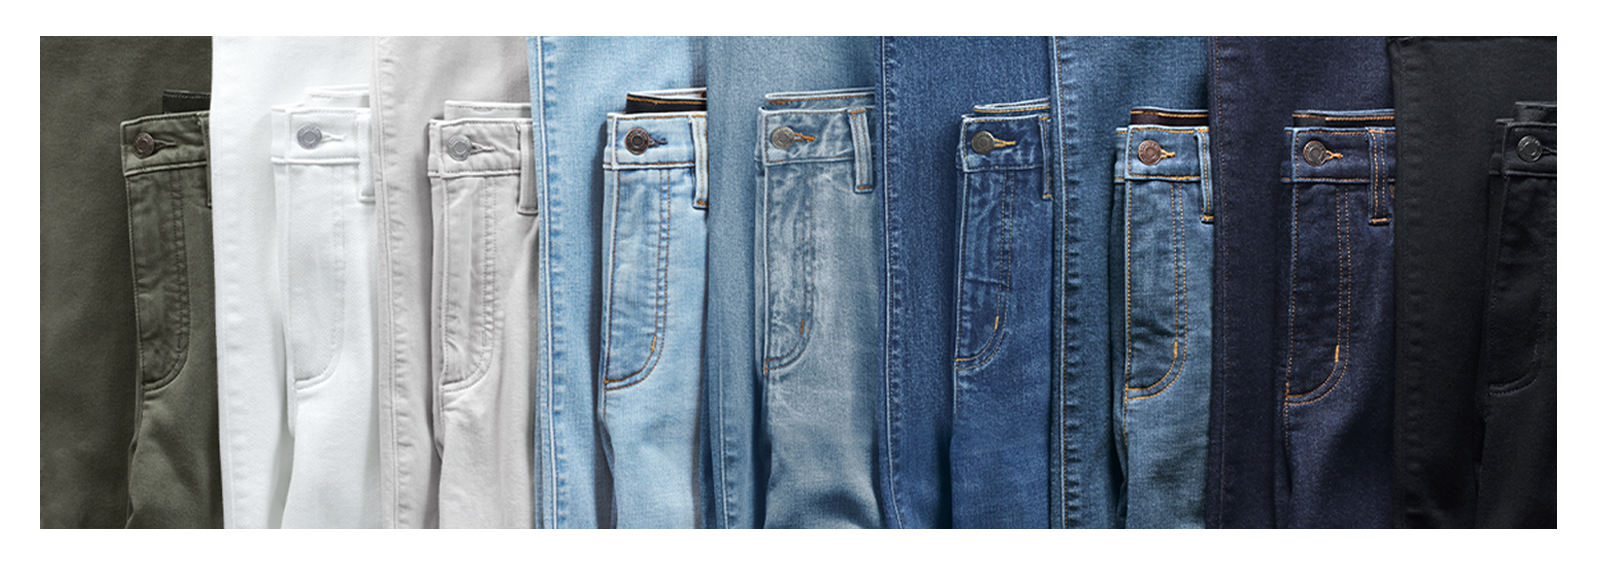 How to Find The Perfect Jean